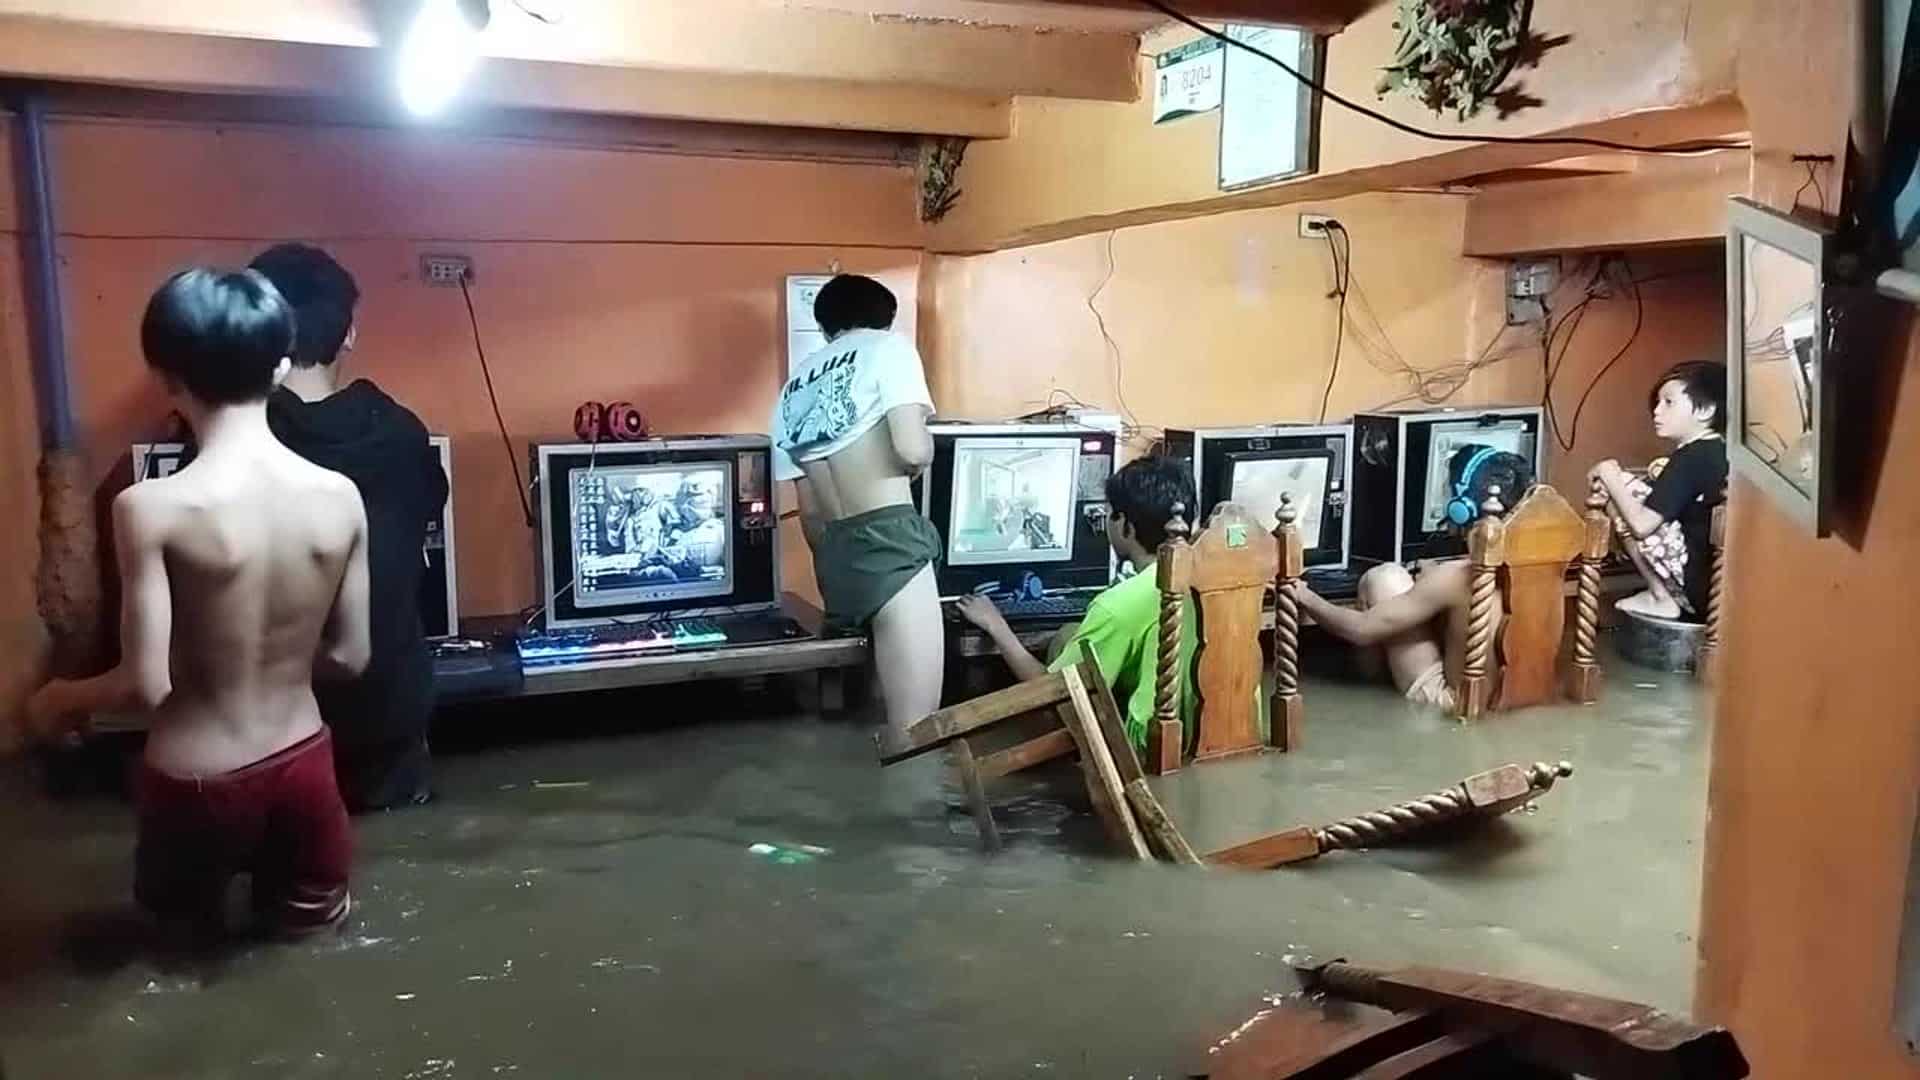 gaming while flooding